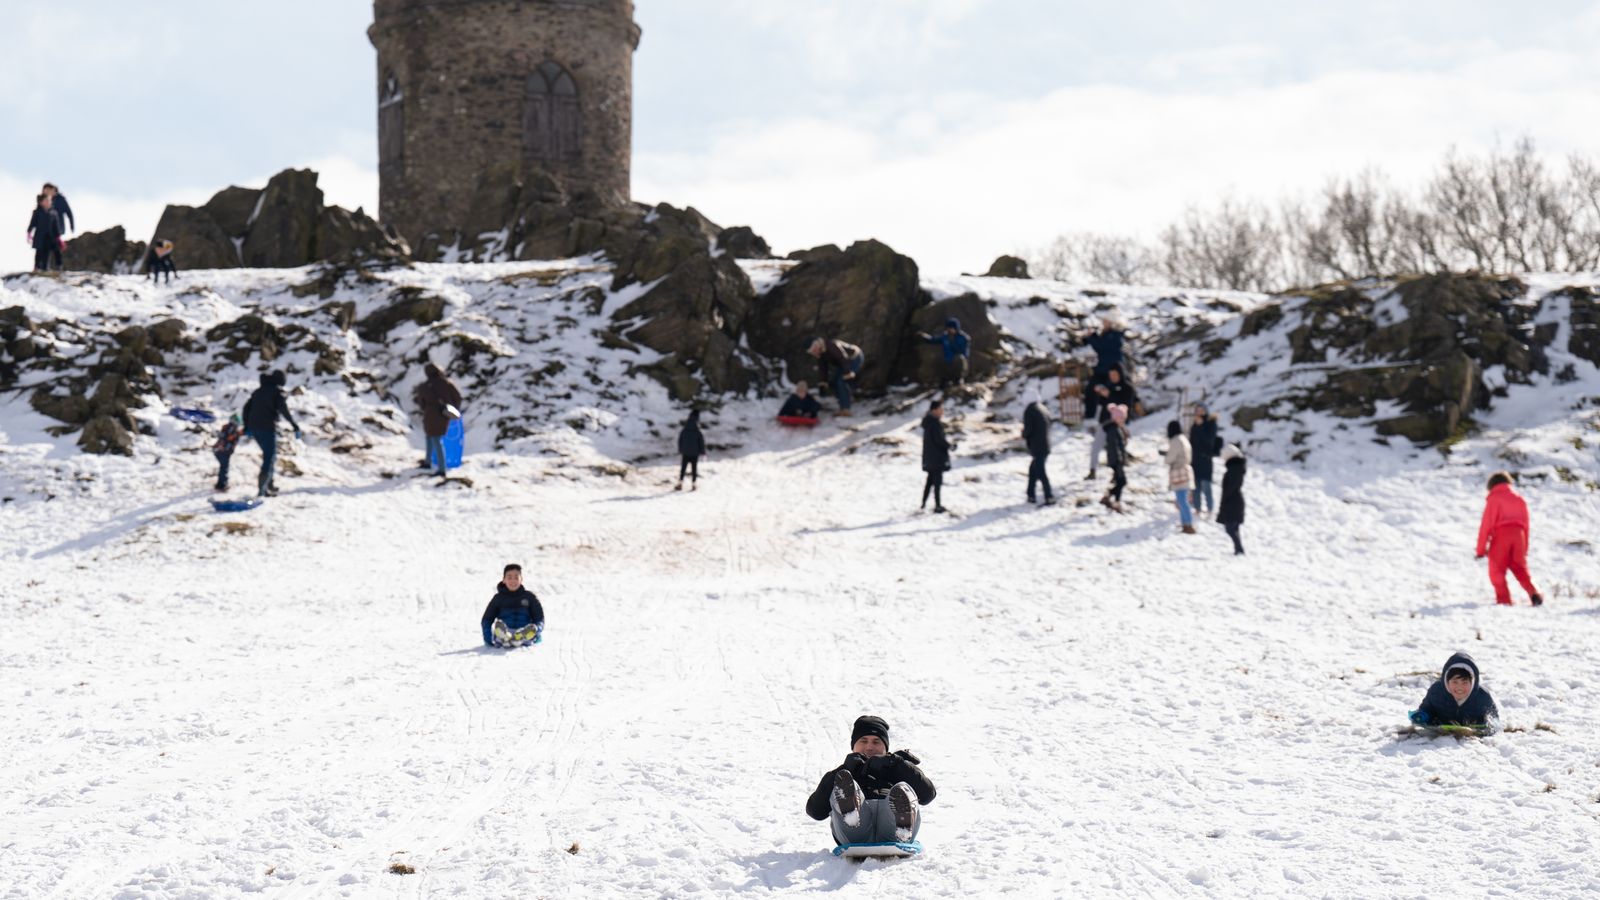 UK weather: Temperatures plunge to -15.2C as wintry conditions continue